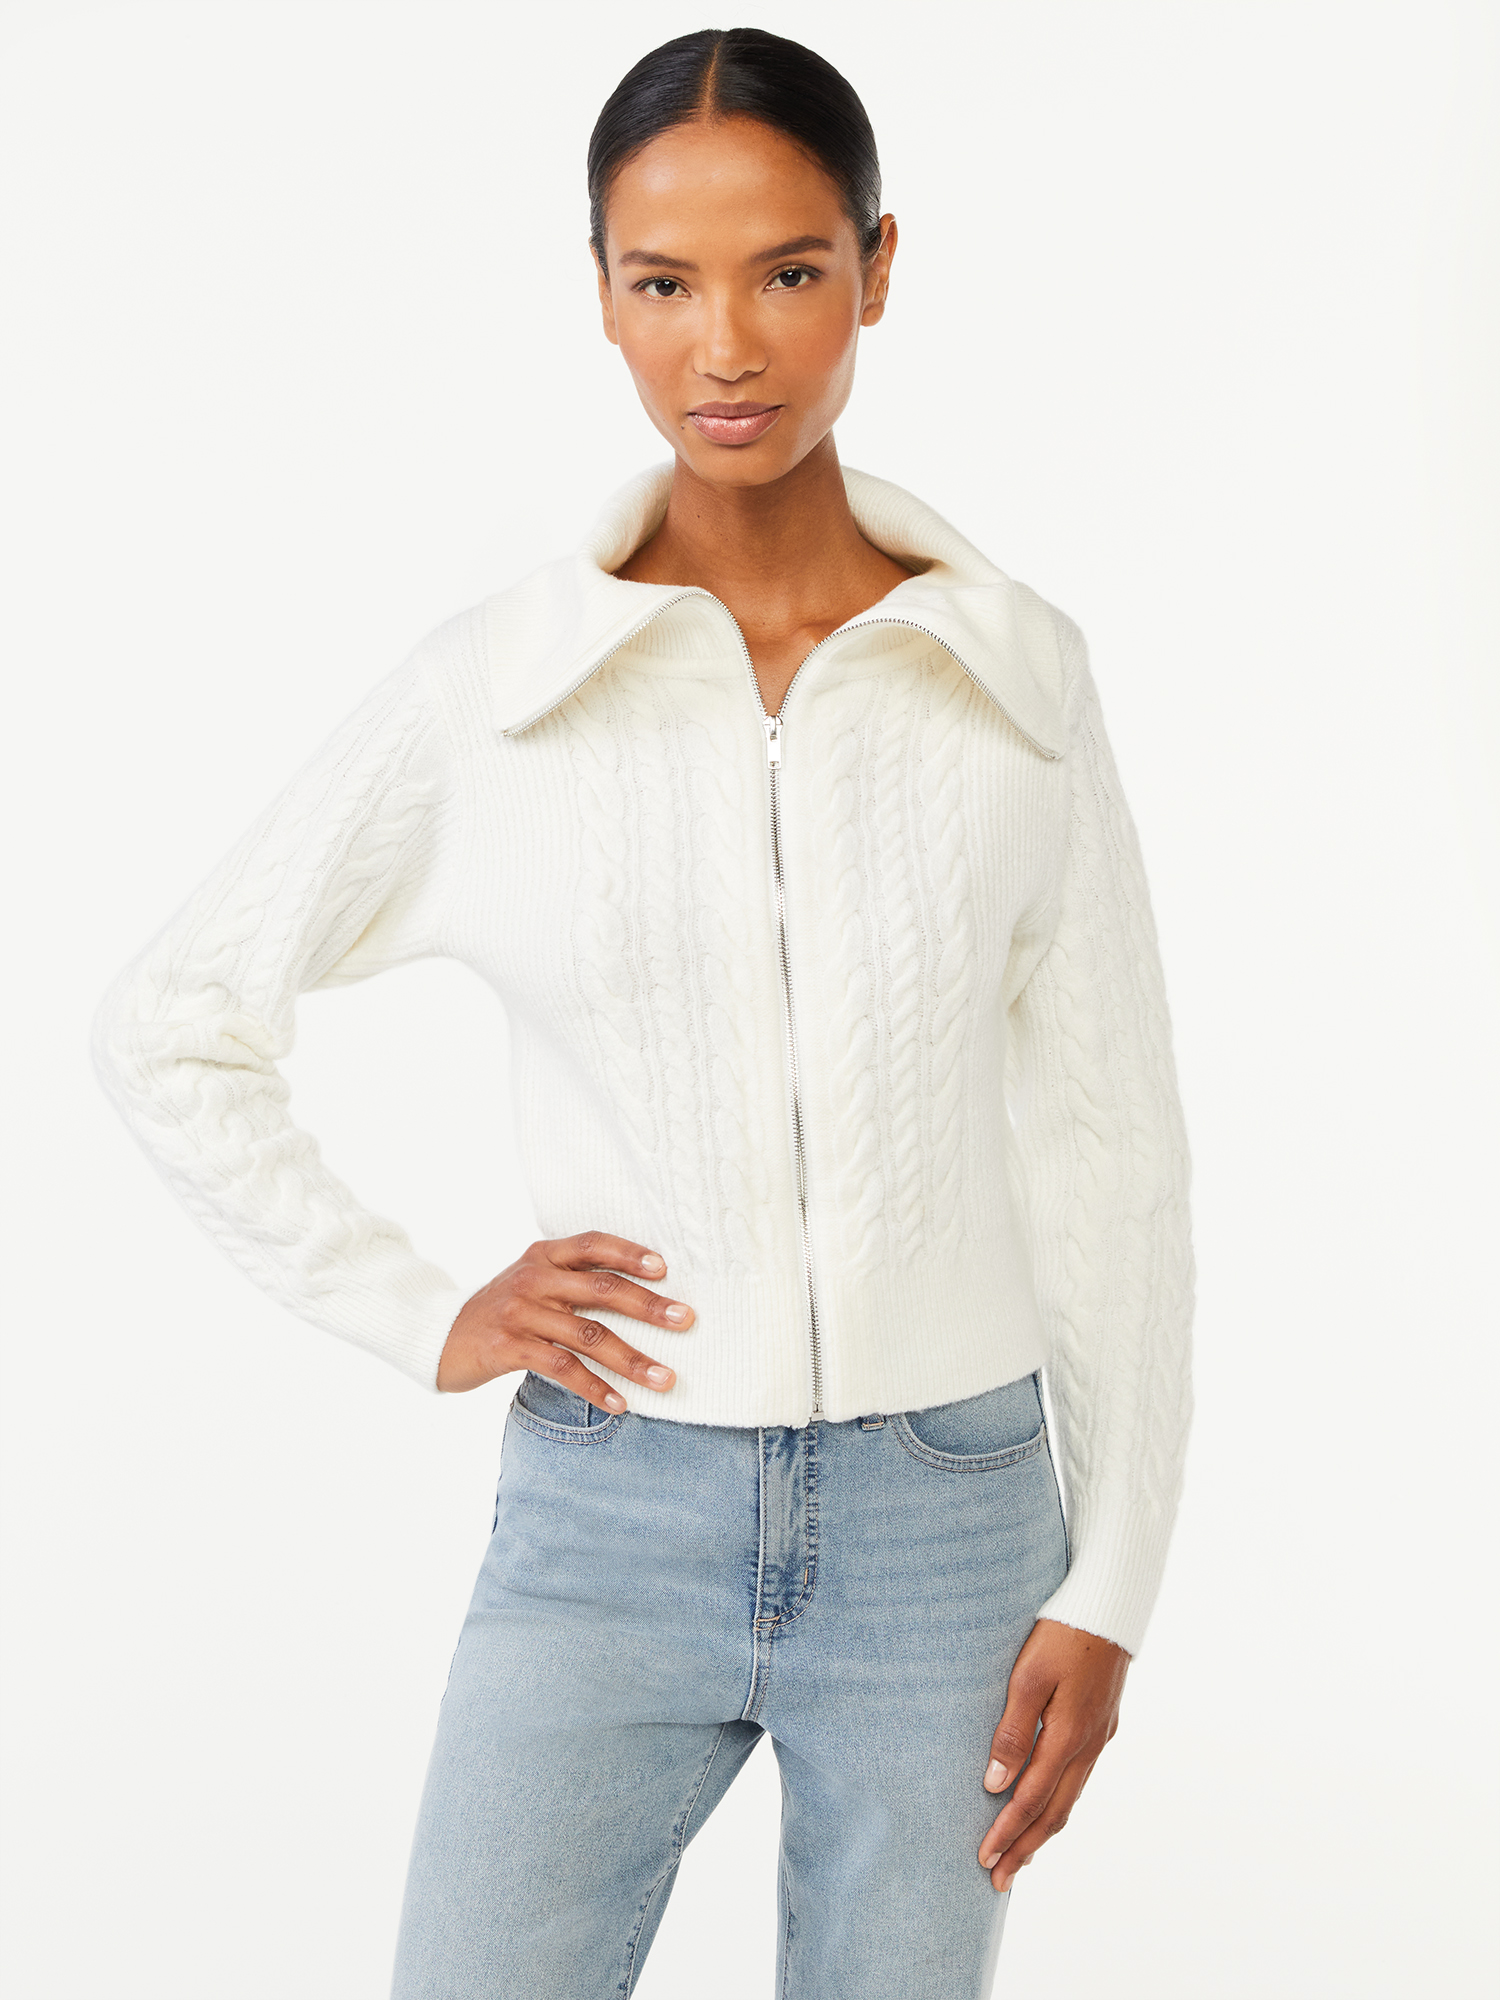 Scoop Women's Zip Front Cable Knit Sweater - image 1 of 5